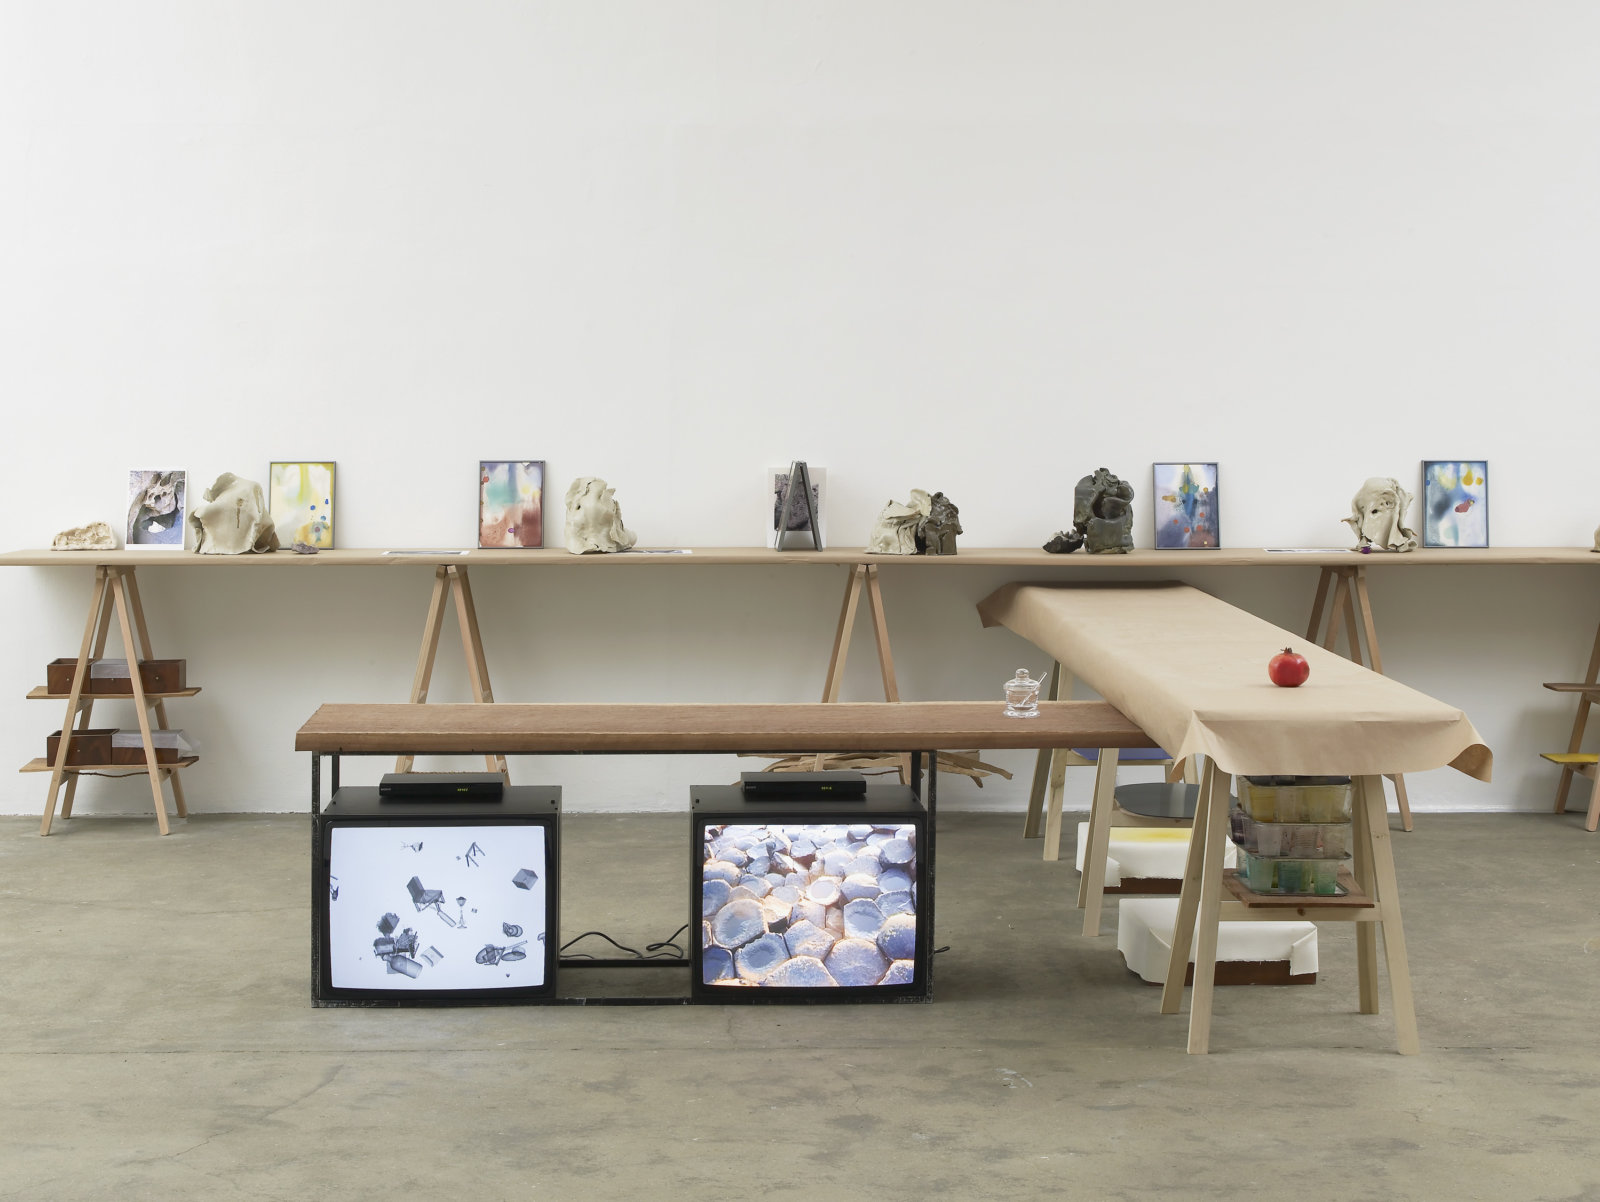 Christina Mackie, Fall Force and Planet, 2012, hantarax monitors, mahogany, glass jar, 2 DVDs, 4 minutes and 8 minutes, dimensions variable. Installation view, Painting the Weights, Chisenhale Gallery, London, UK, 2012